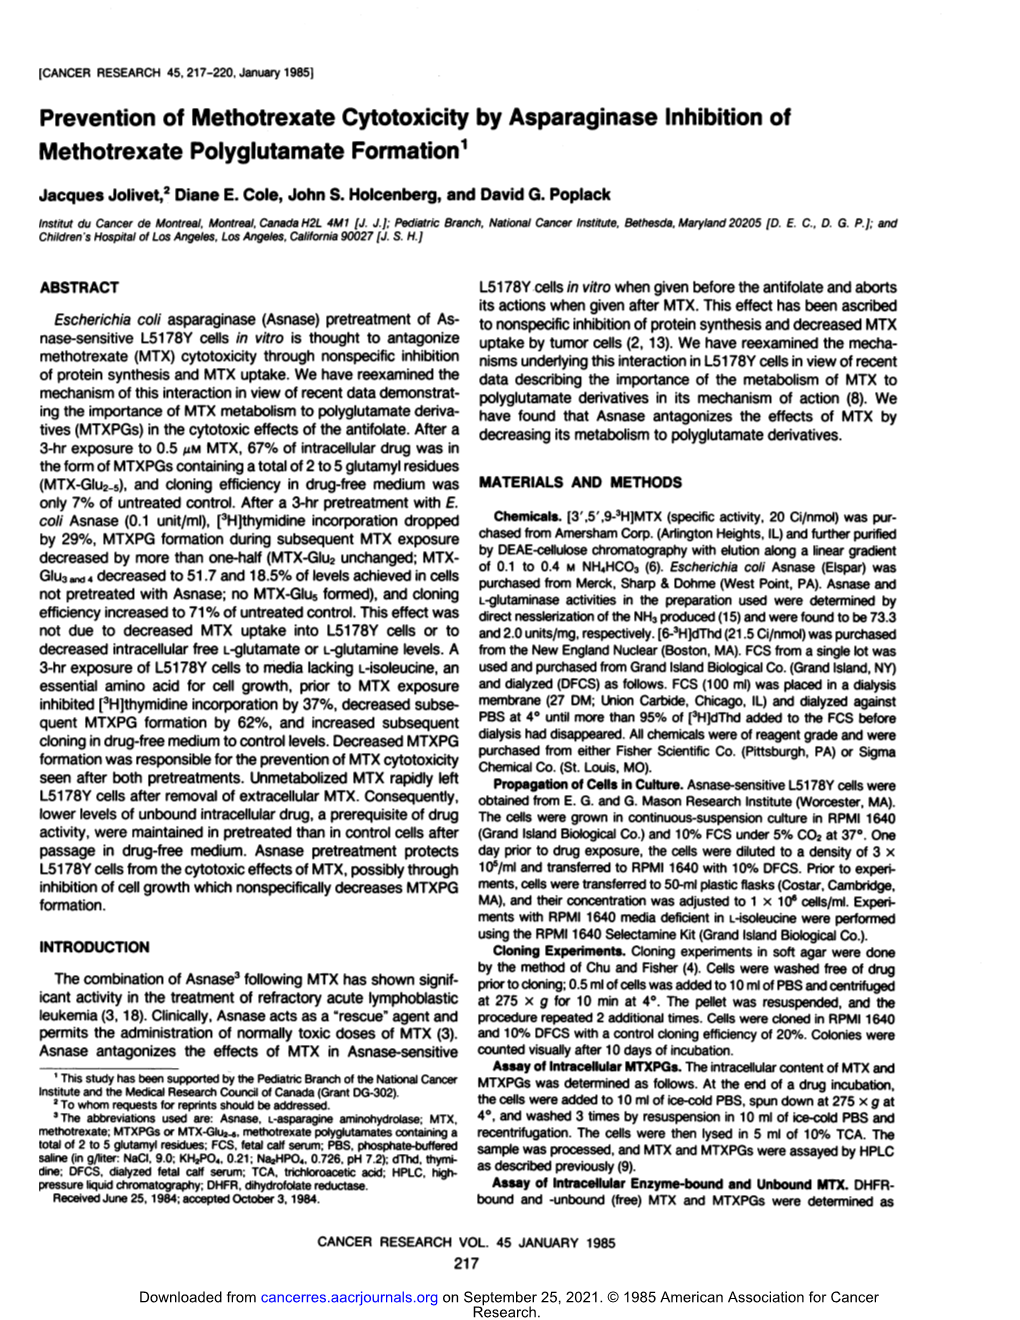 Prevention of Methotrexate Cytotoxicity by Asparaginase Inhibition of Methotrexate Polyglutamate Formation1